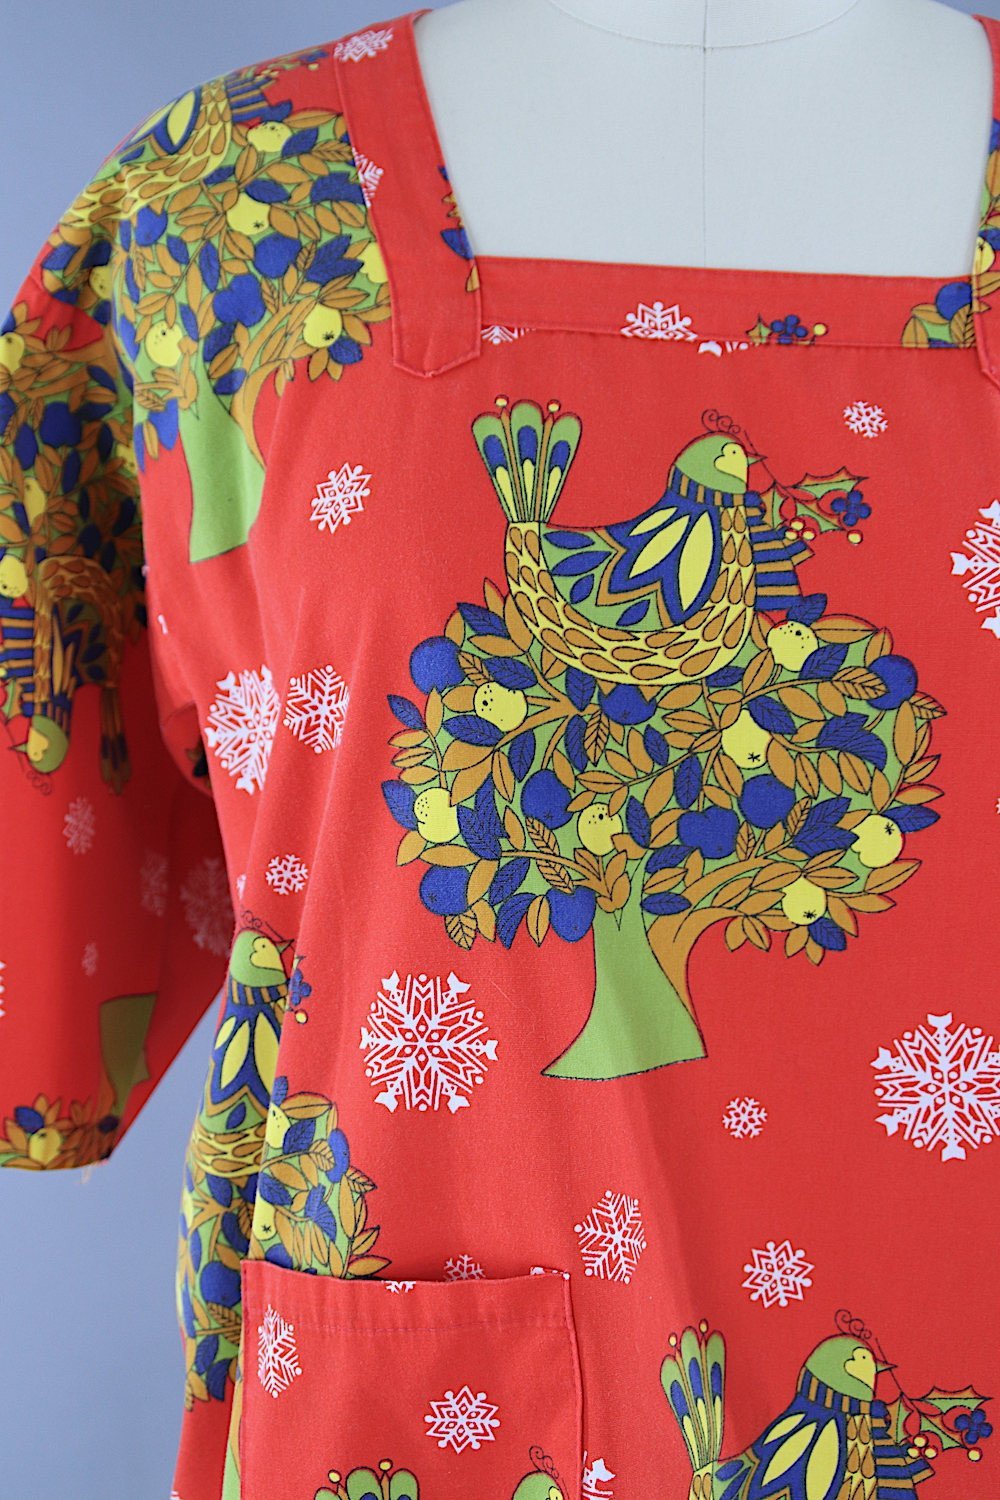 Vintage 1960s Smock Apron / 12 Days of Christmas Partridge in a Pear Tree - ThisBlueBird